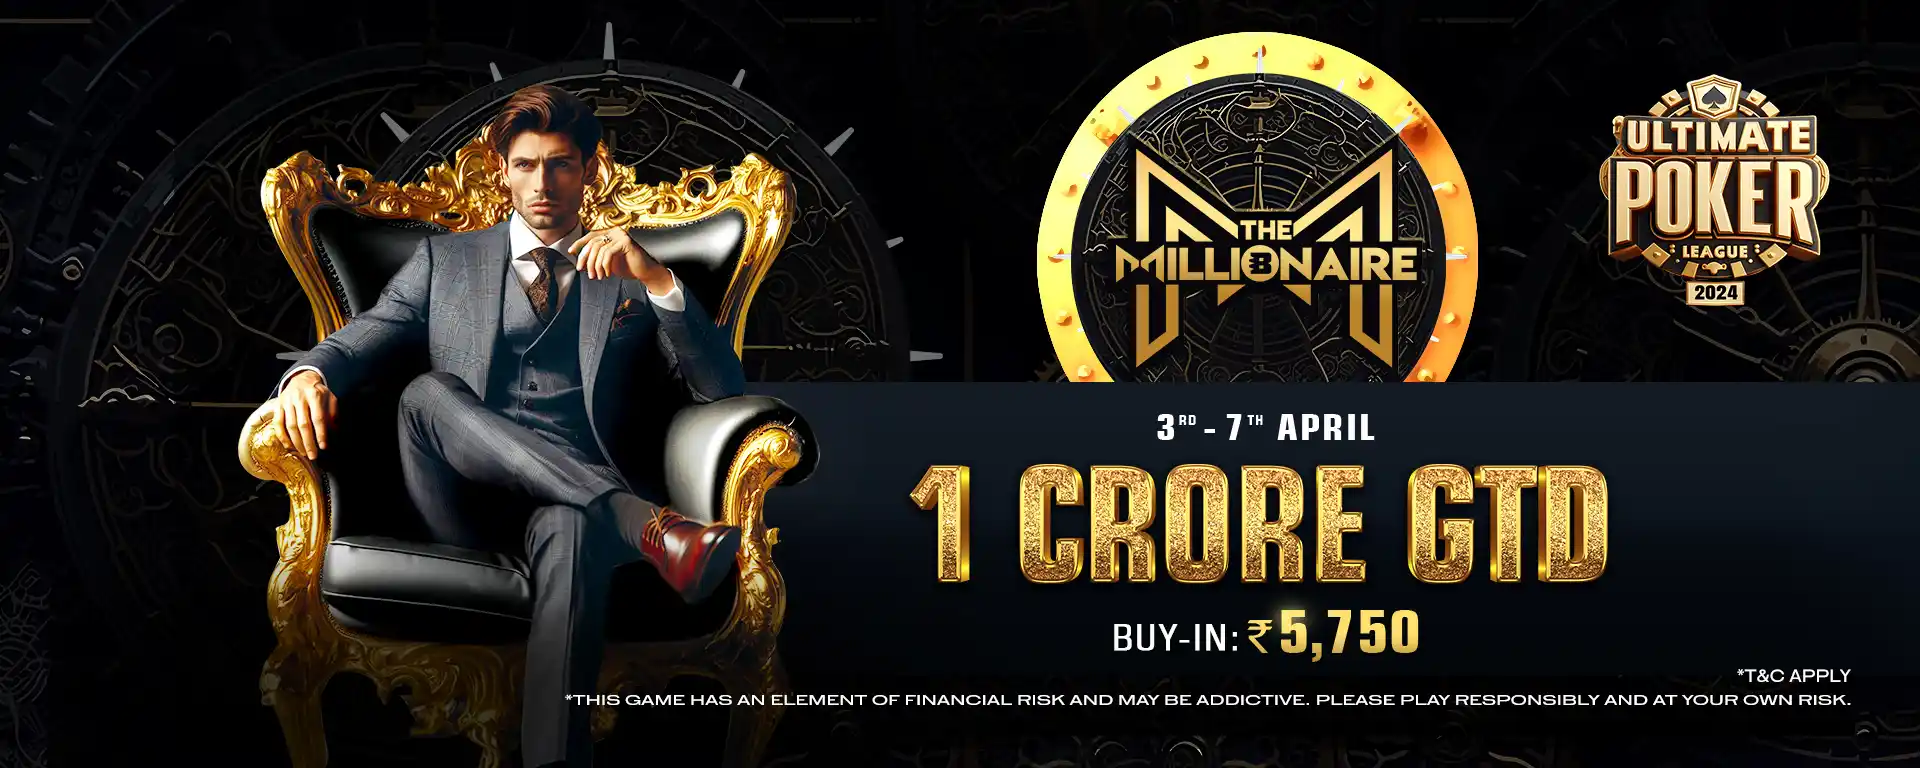 Turn Your Skills into Lakhs: The Millionaire VIII Poker Series is Here!